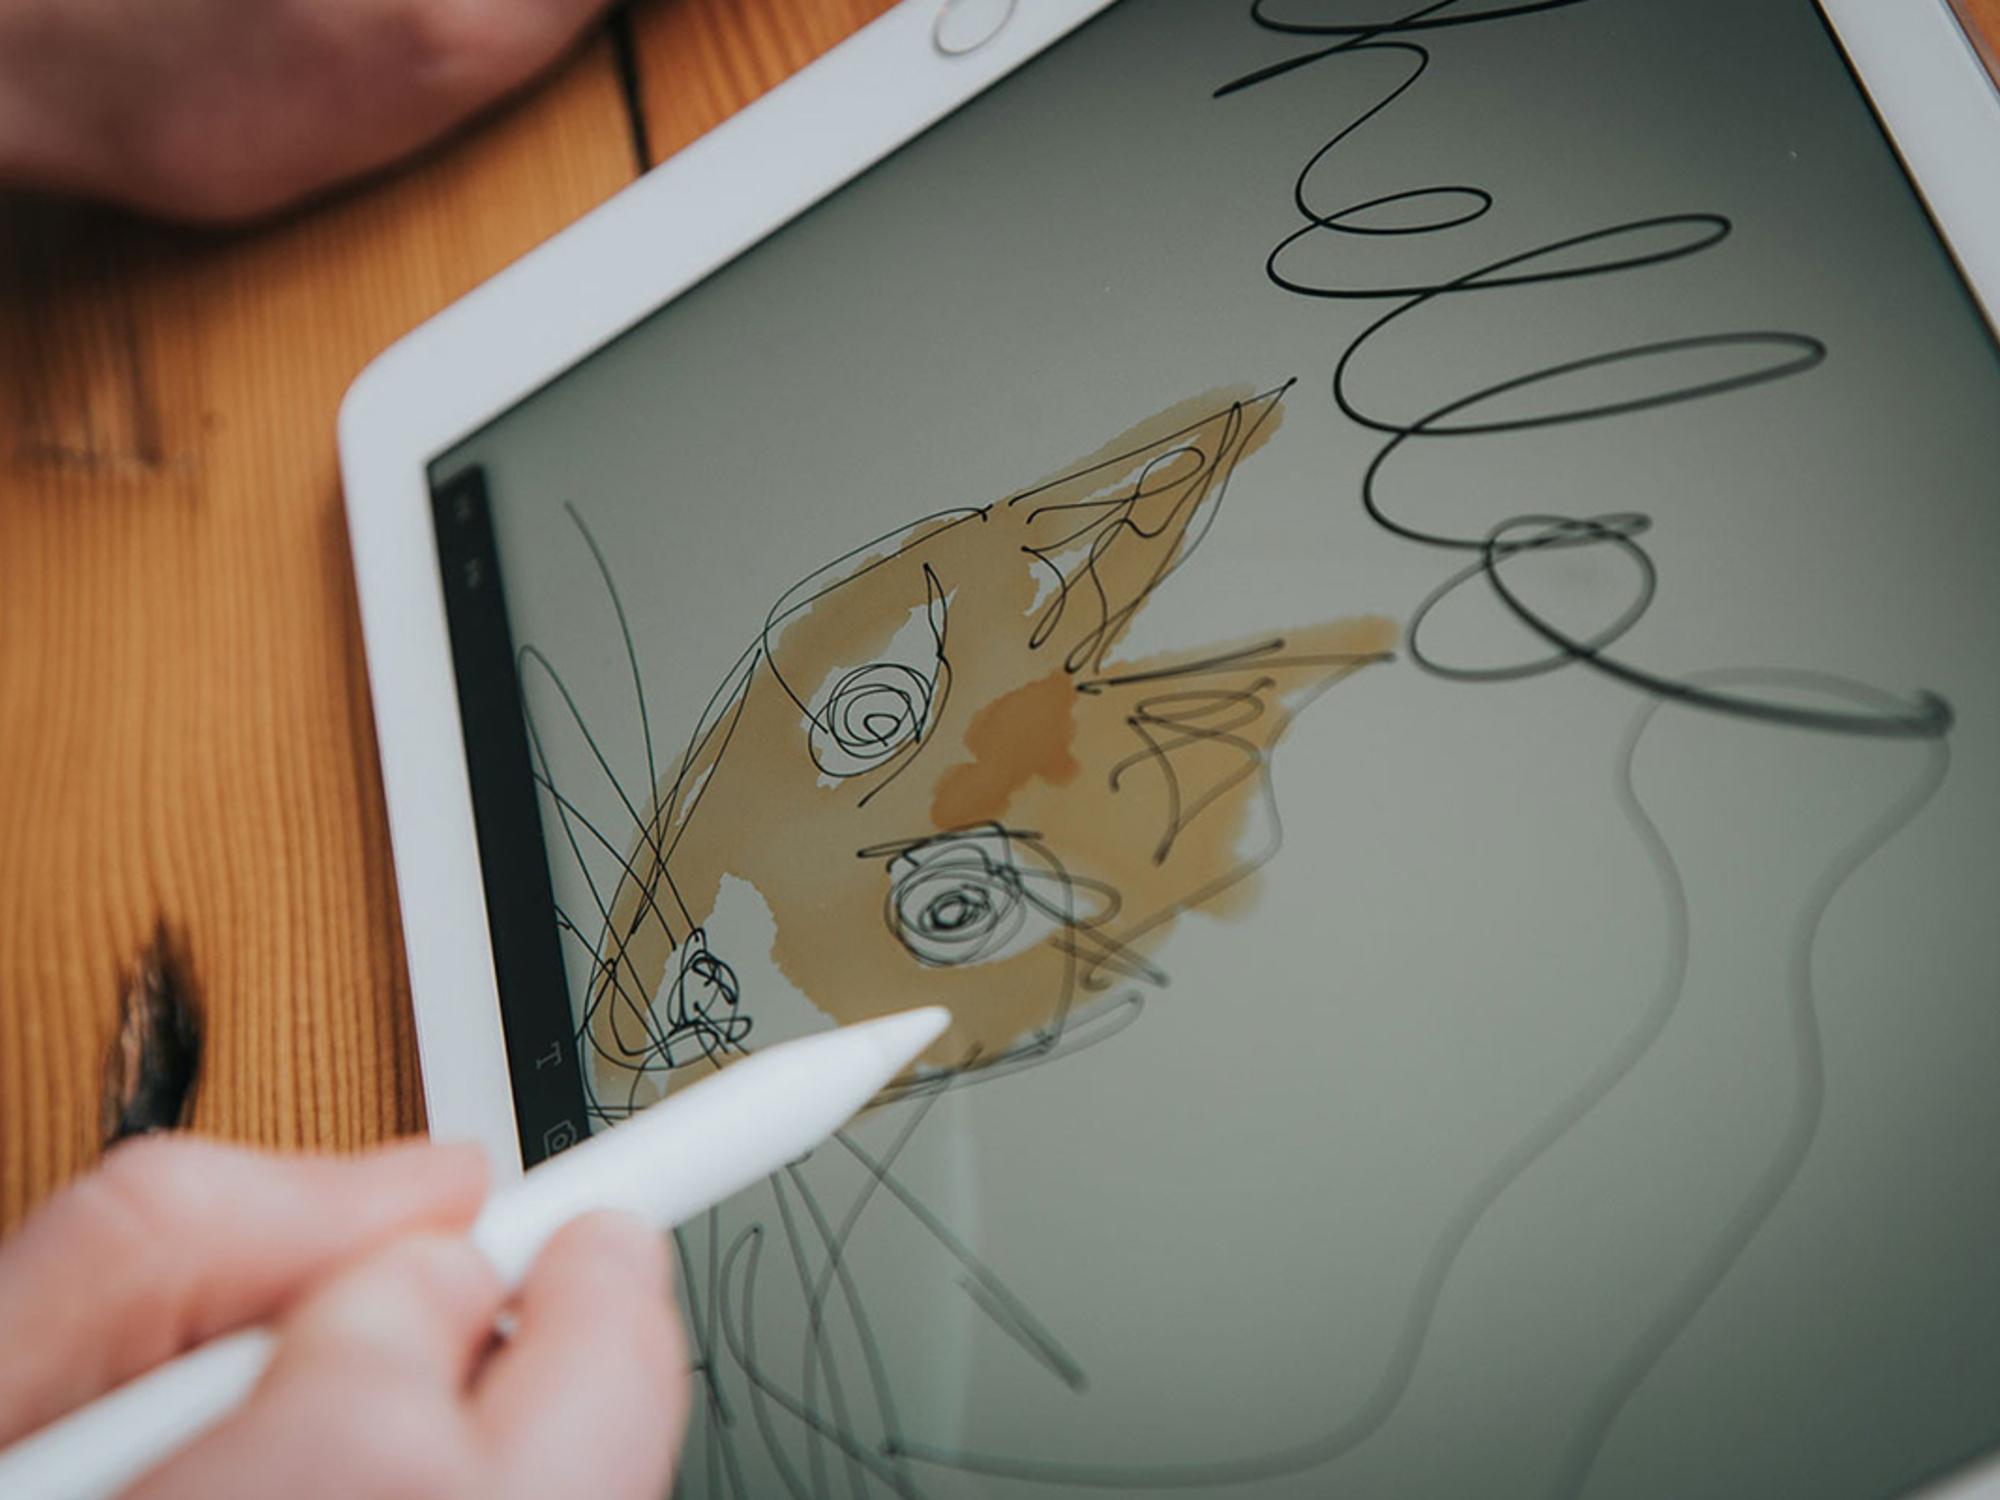 These refurbished iPads are on sale for dramatically low prices